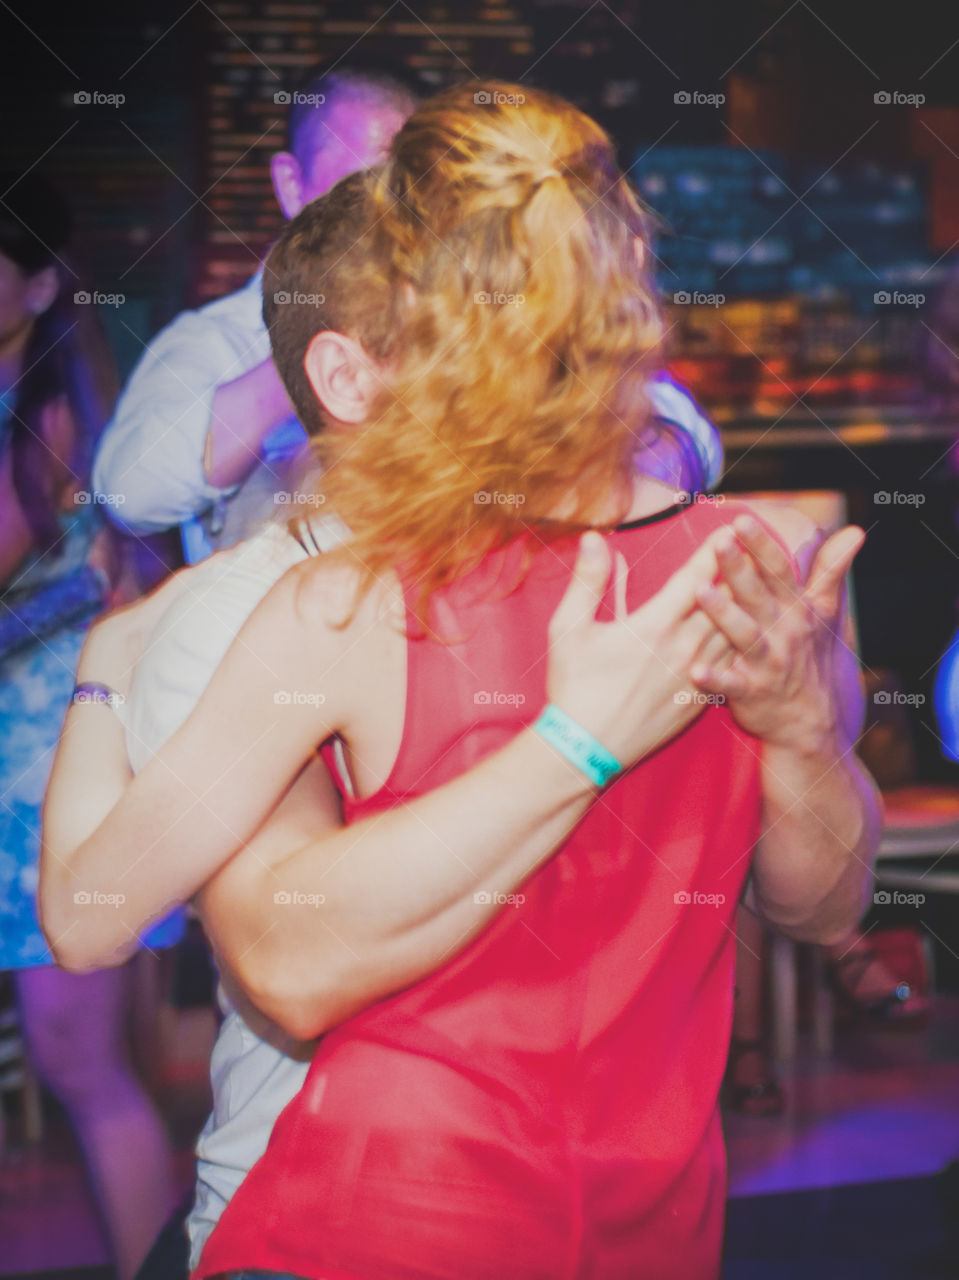 couple dancing in the club, photo taken from behind, lady in red blouse 